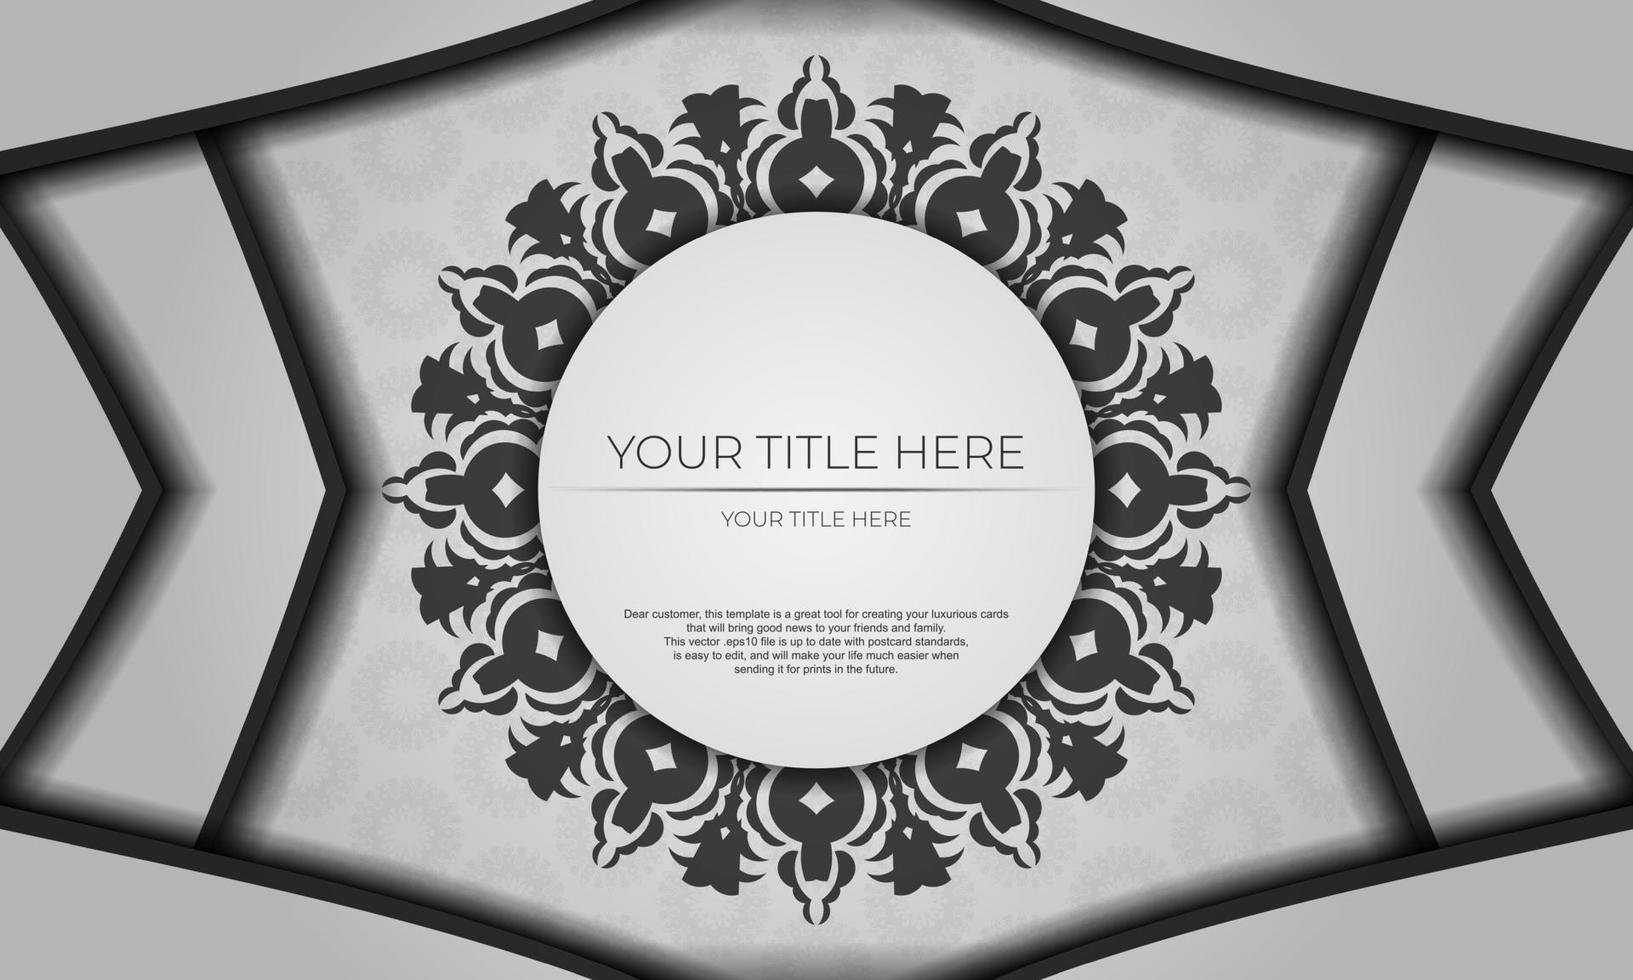 Invitation card design with luxurious ornaments. White background with greek luxury vintage ornaments and place for your text. vector